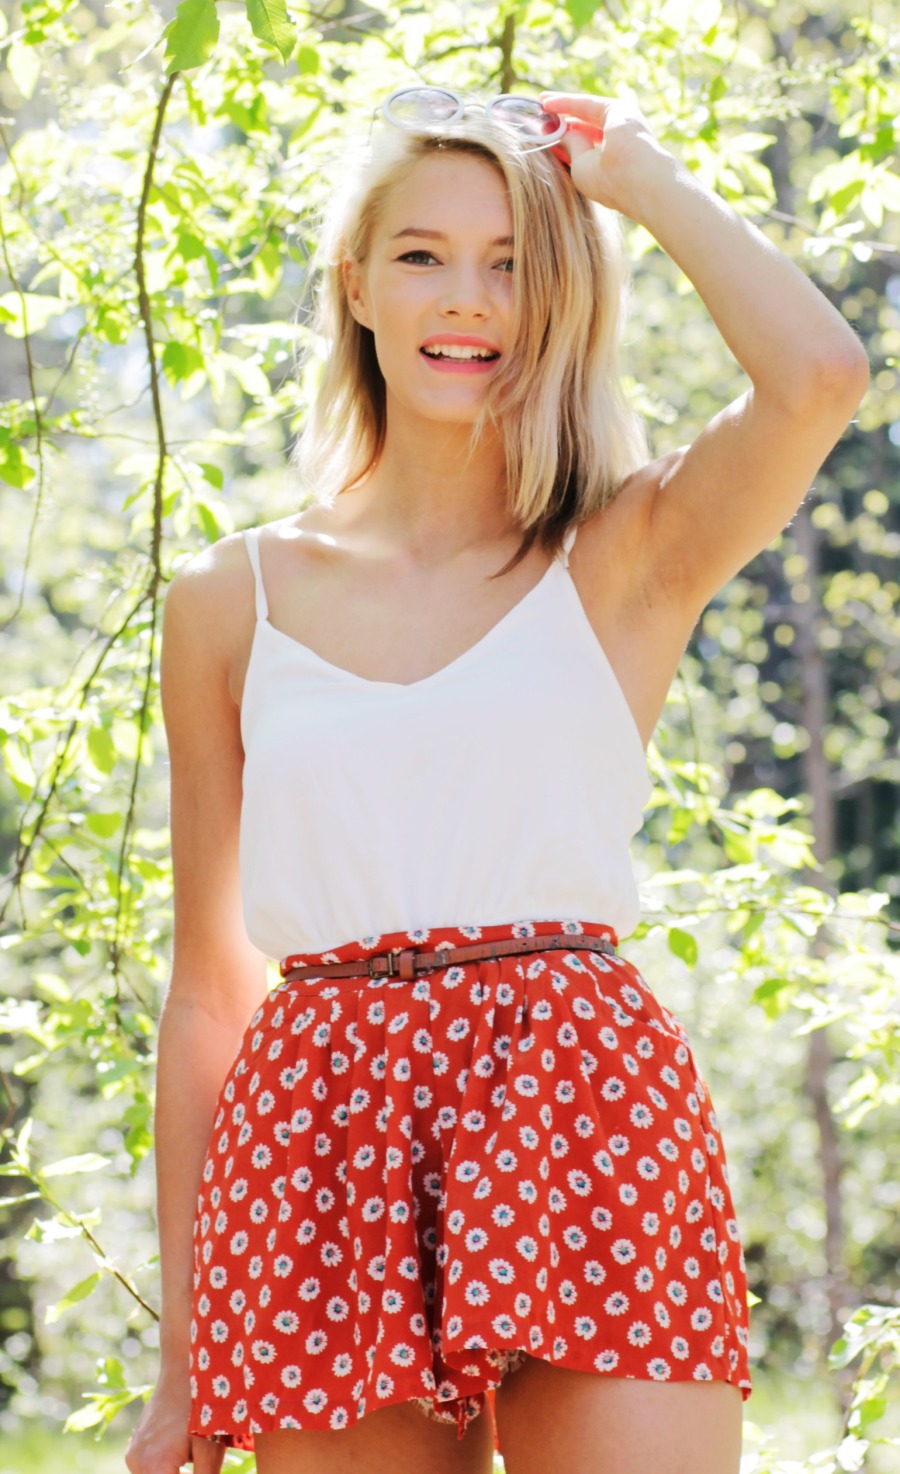 Petra Karlsson wearing white tank top and red print skirt